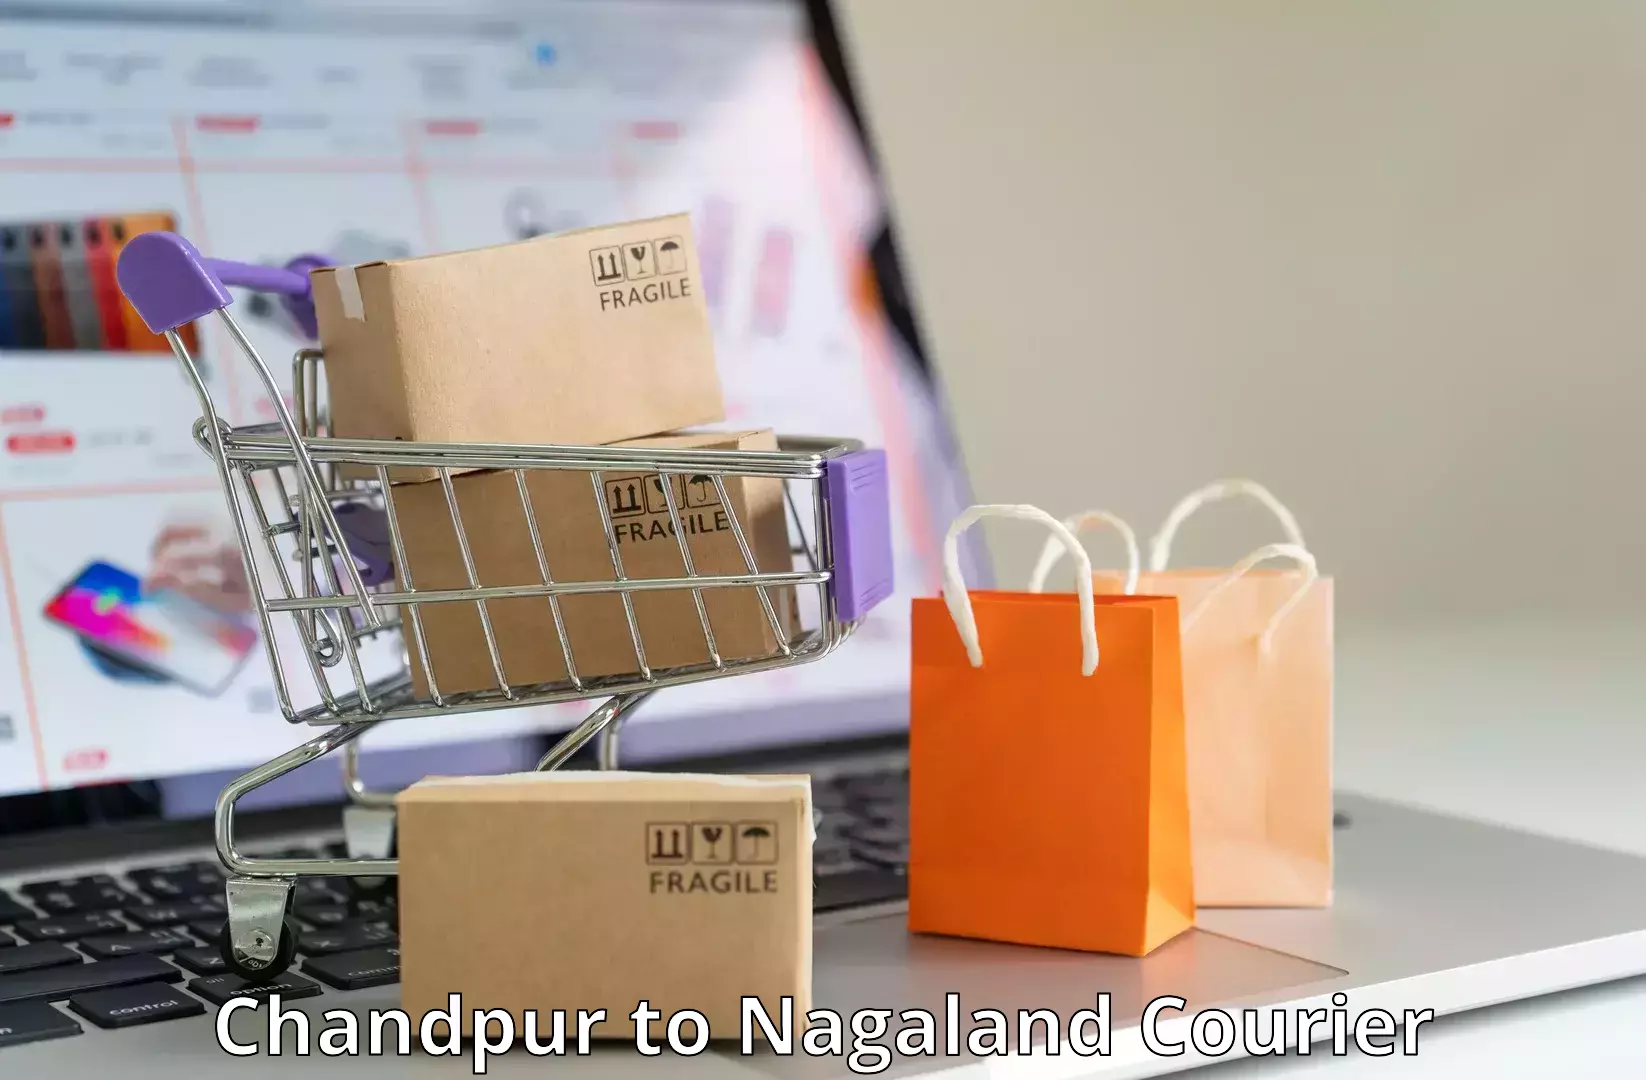 Courier services Chandpur to Nagaland